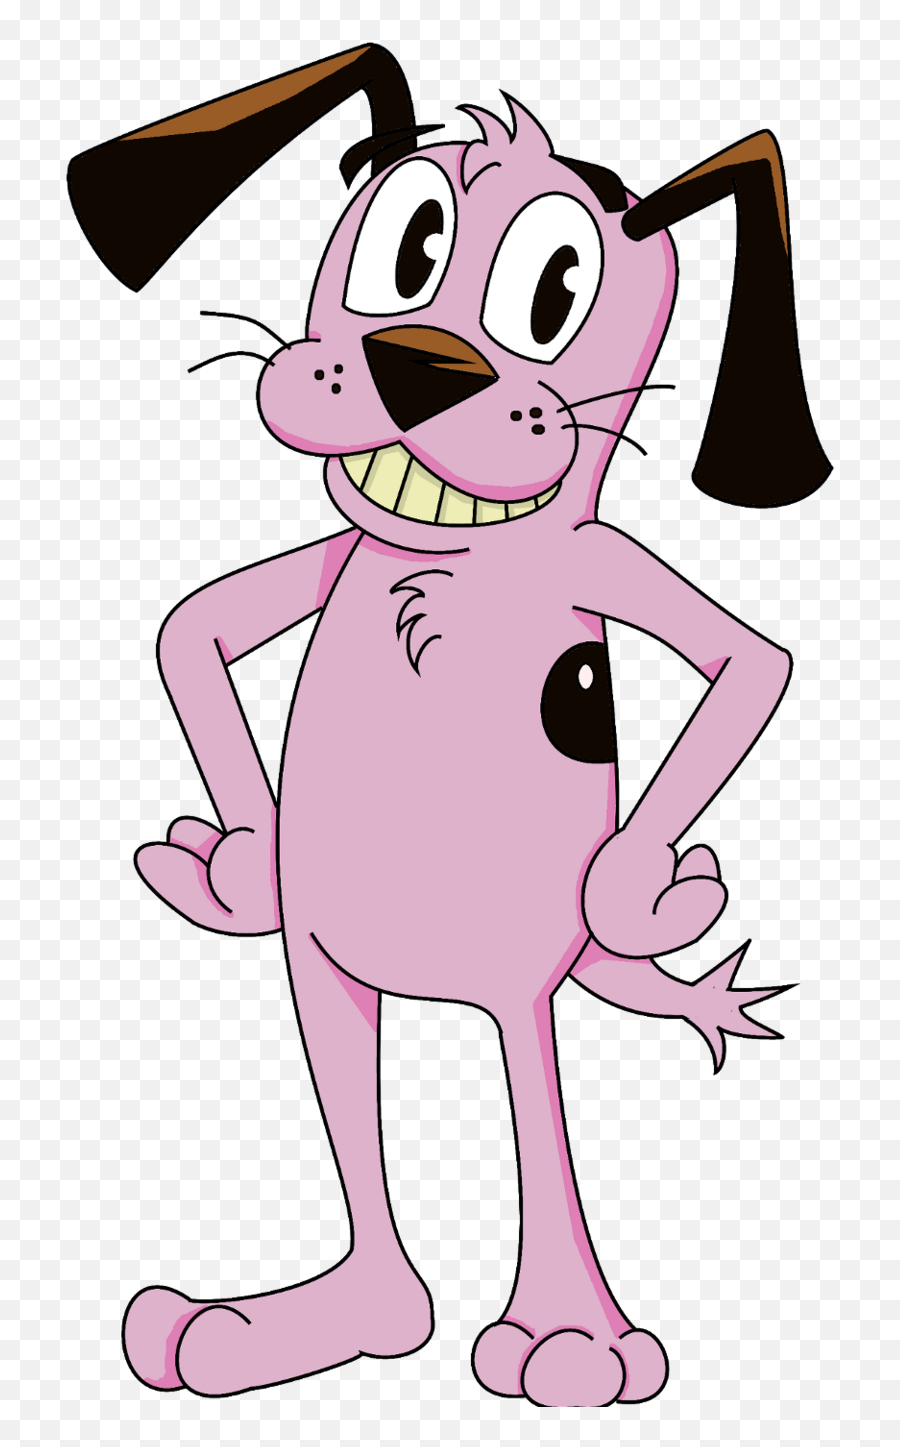 Download Hd Courage The Cowardly Dog - Courage The Cowardly Dog Emoji,Courage The Cowardly Dog Png